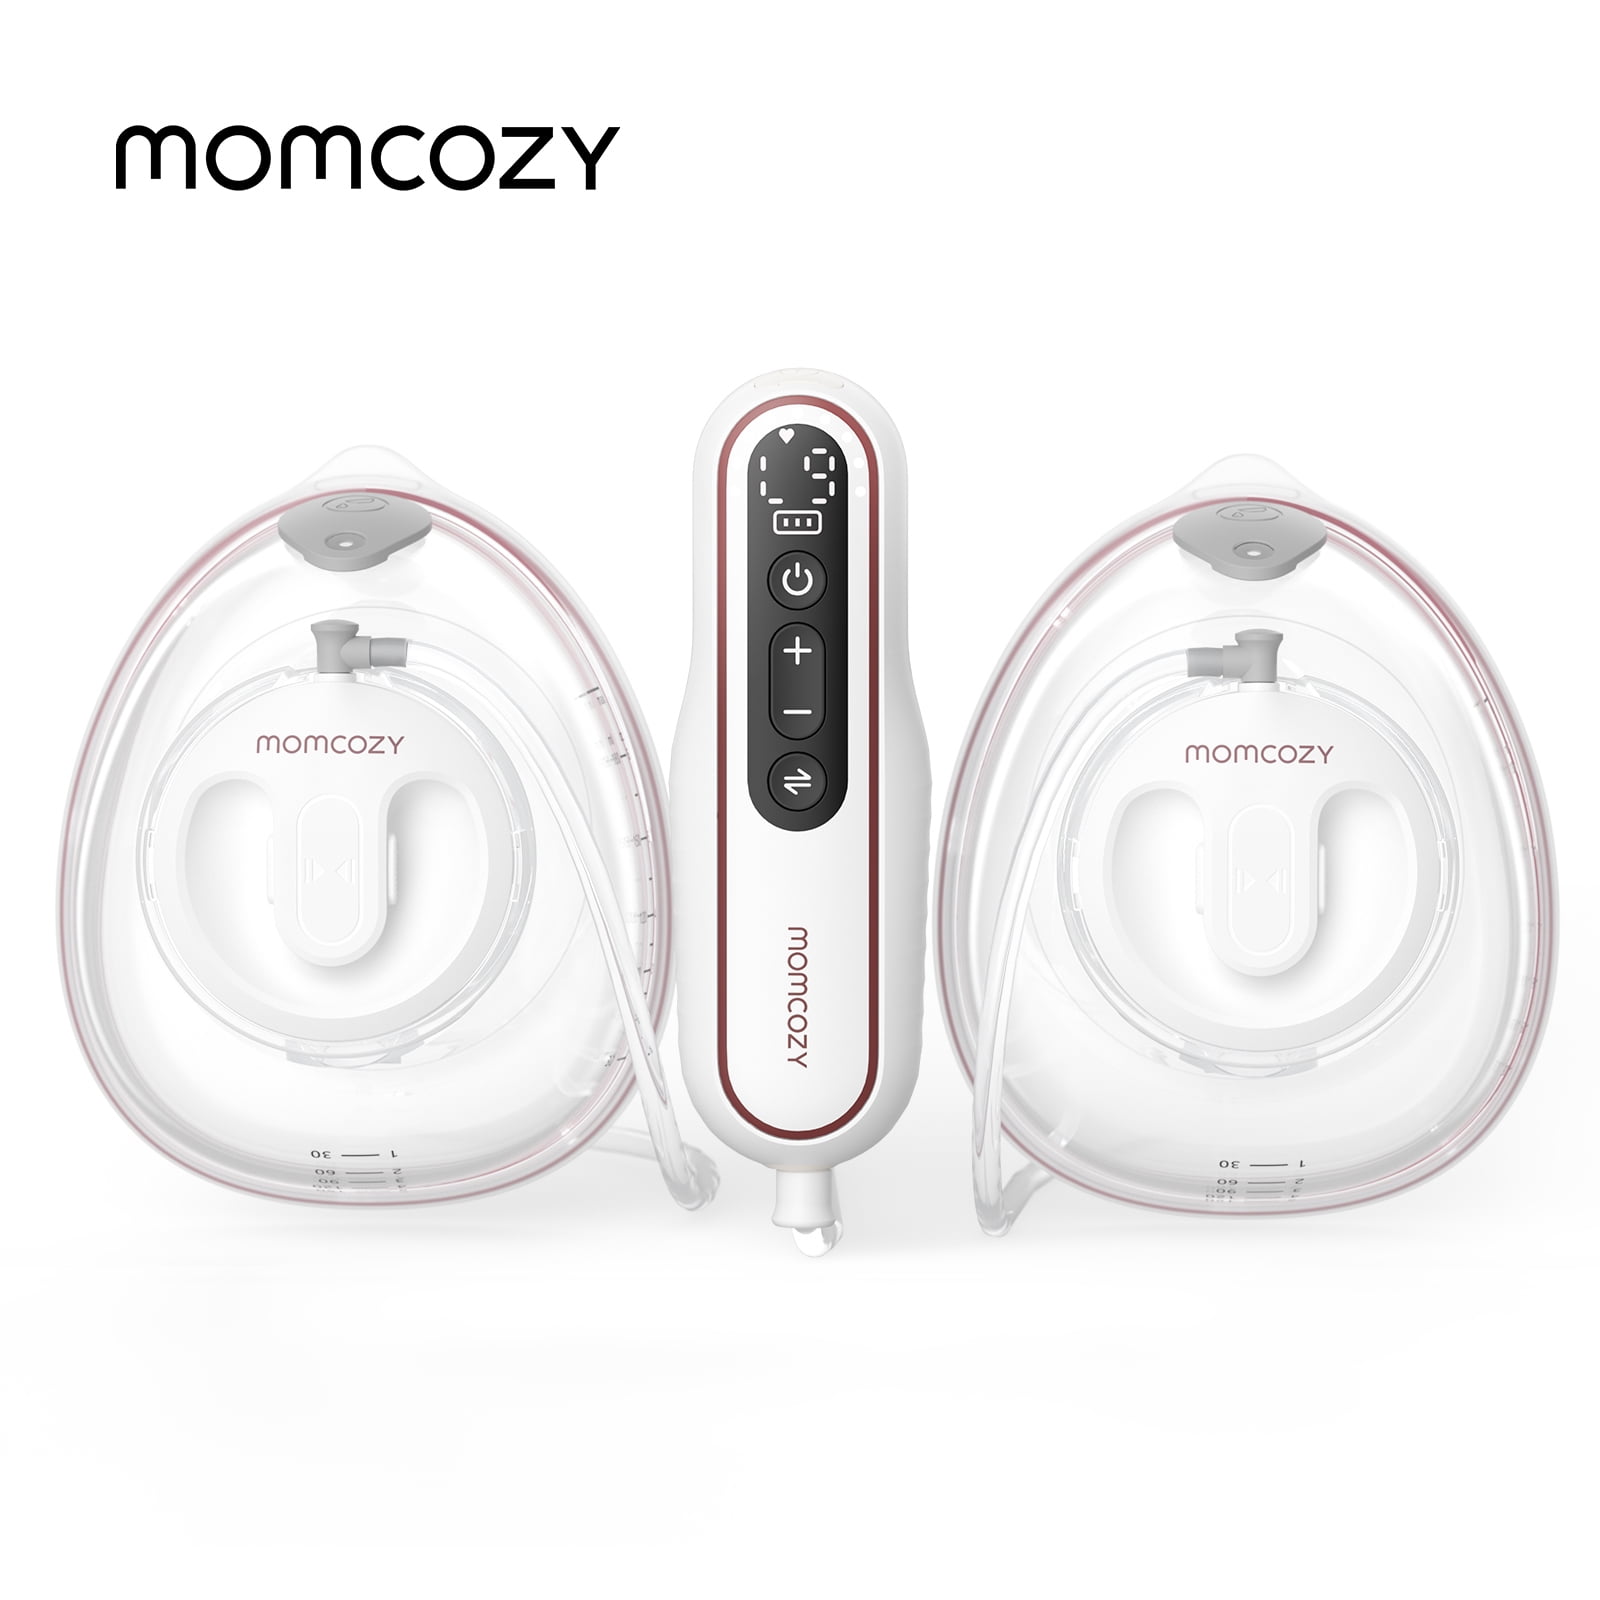 Momcozy V1 and V2 Wearable Pump Reviews - Affordable Hands-Free